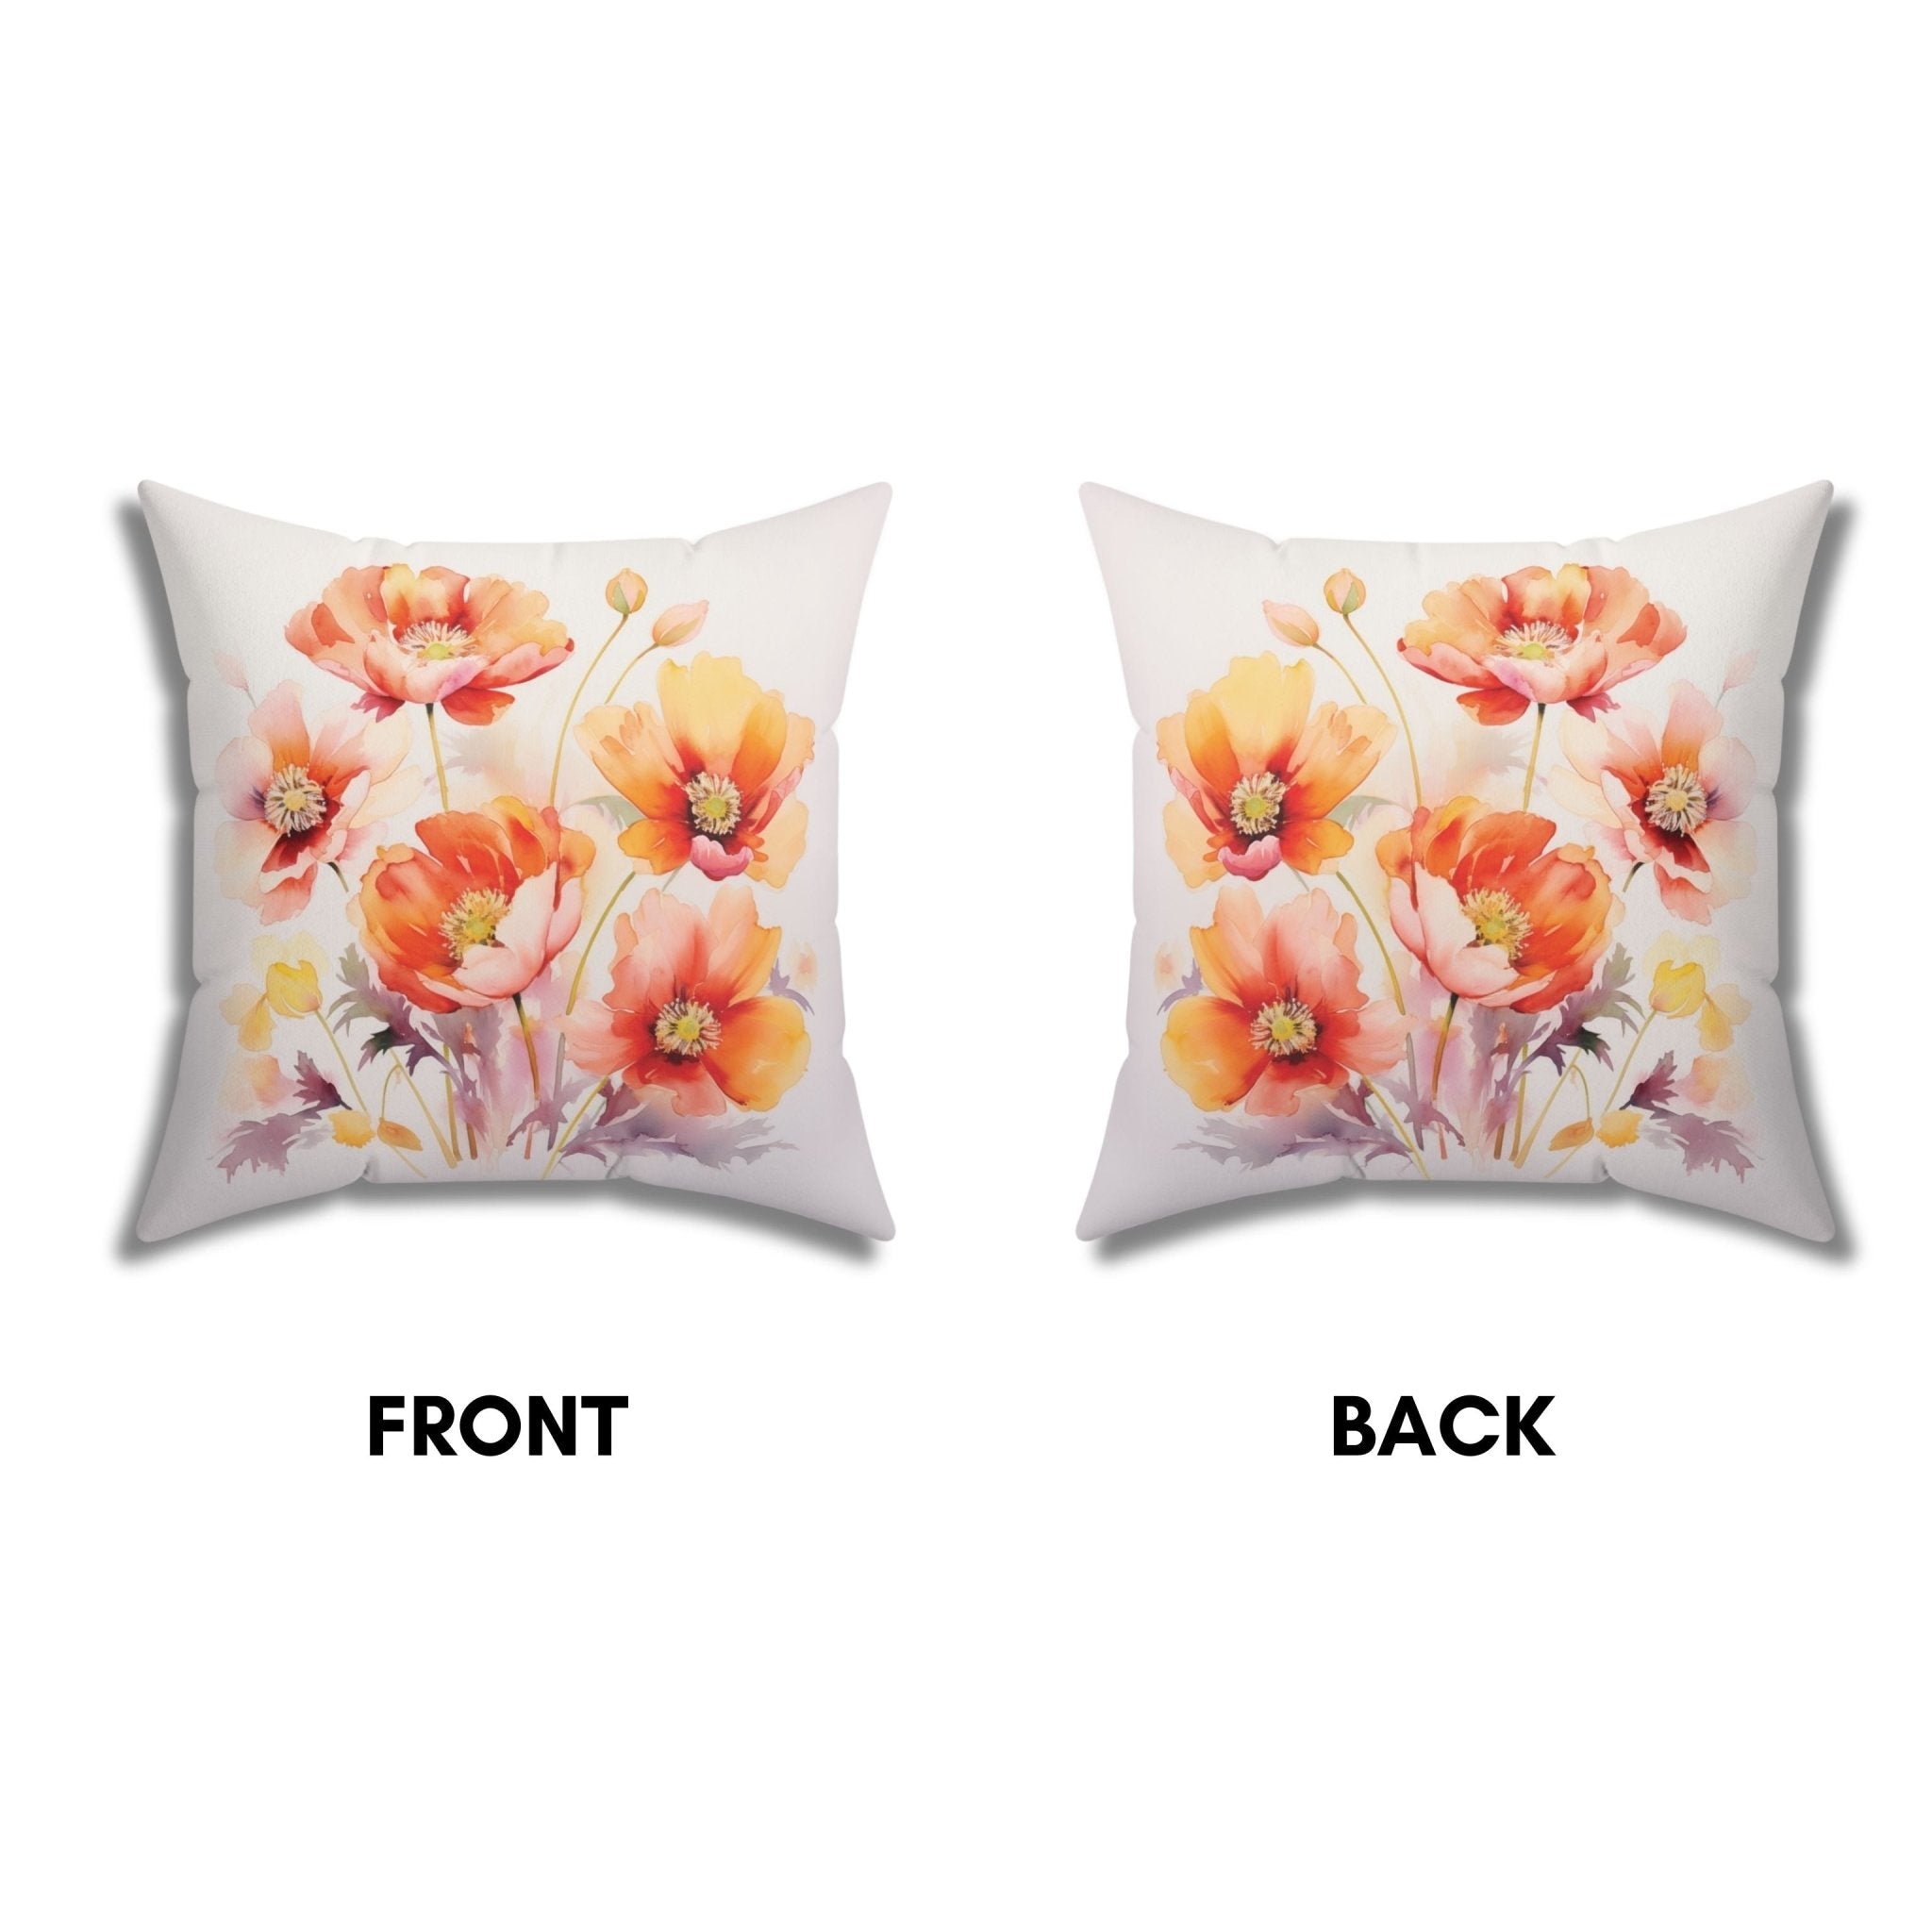 Sunset Blooms: Cozy Decorative Accent Pillow & Cover - My Store